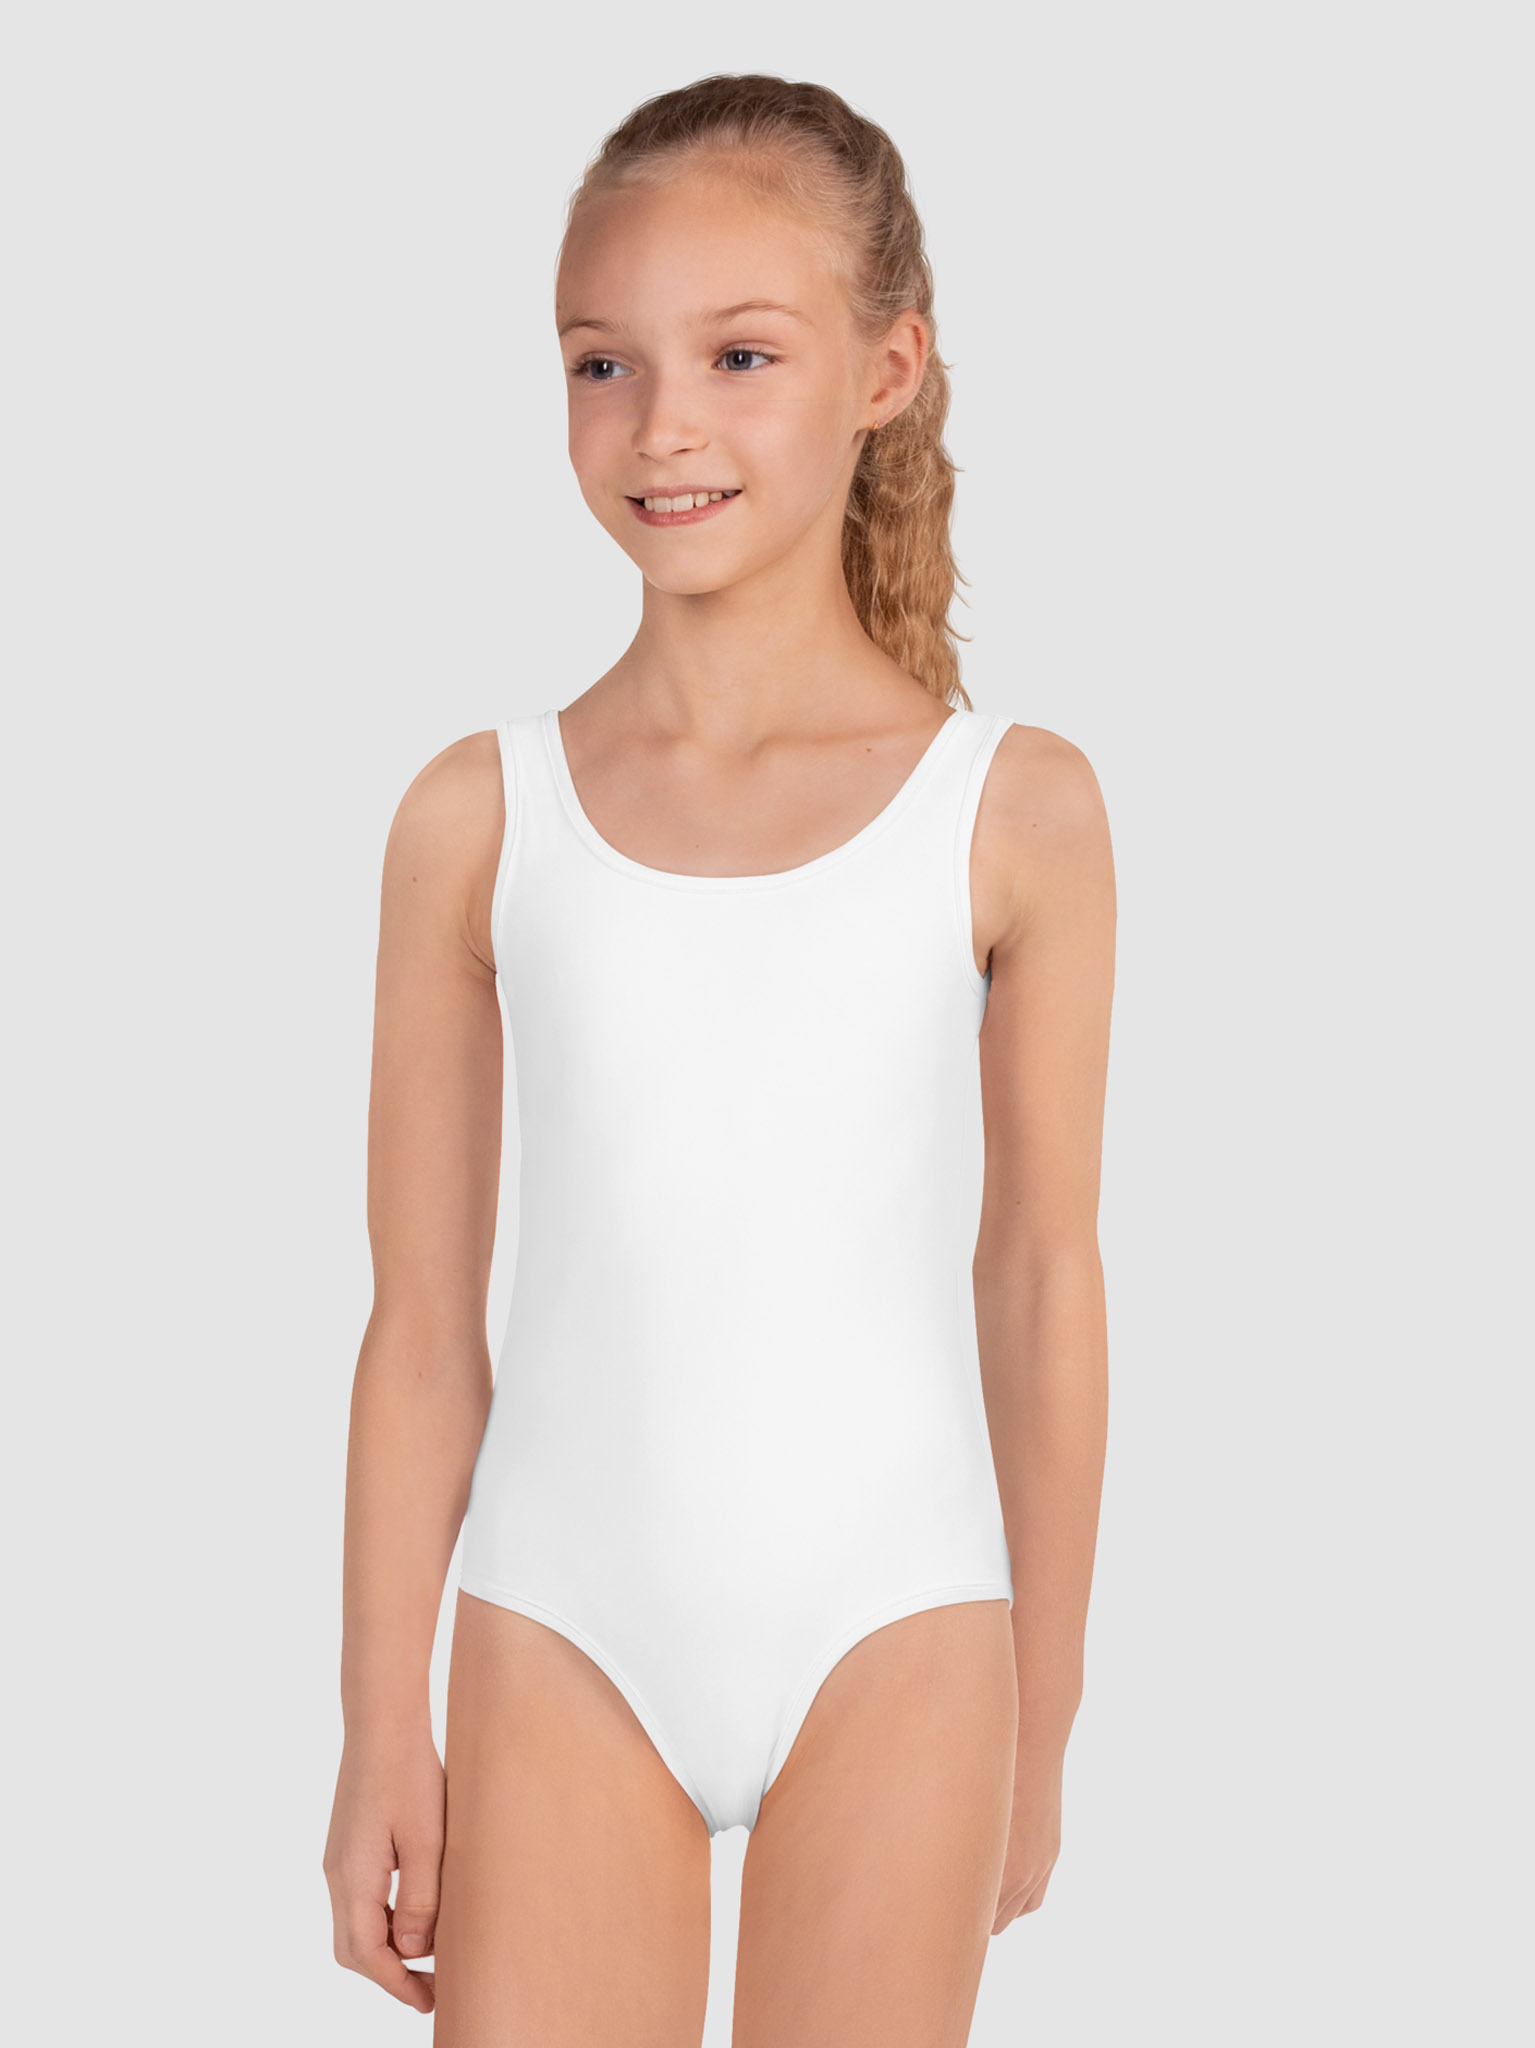 Shopping For Kid Bathing Suits: Ideas & Style Inspiration • FamilyApp